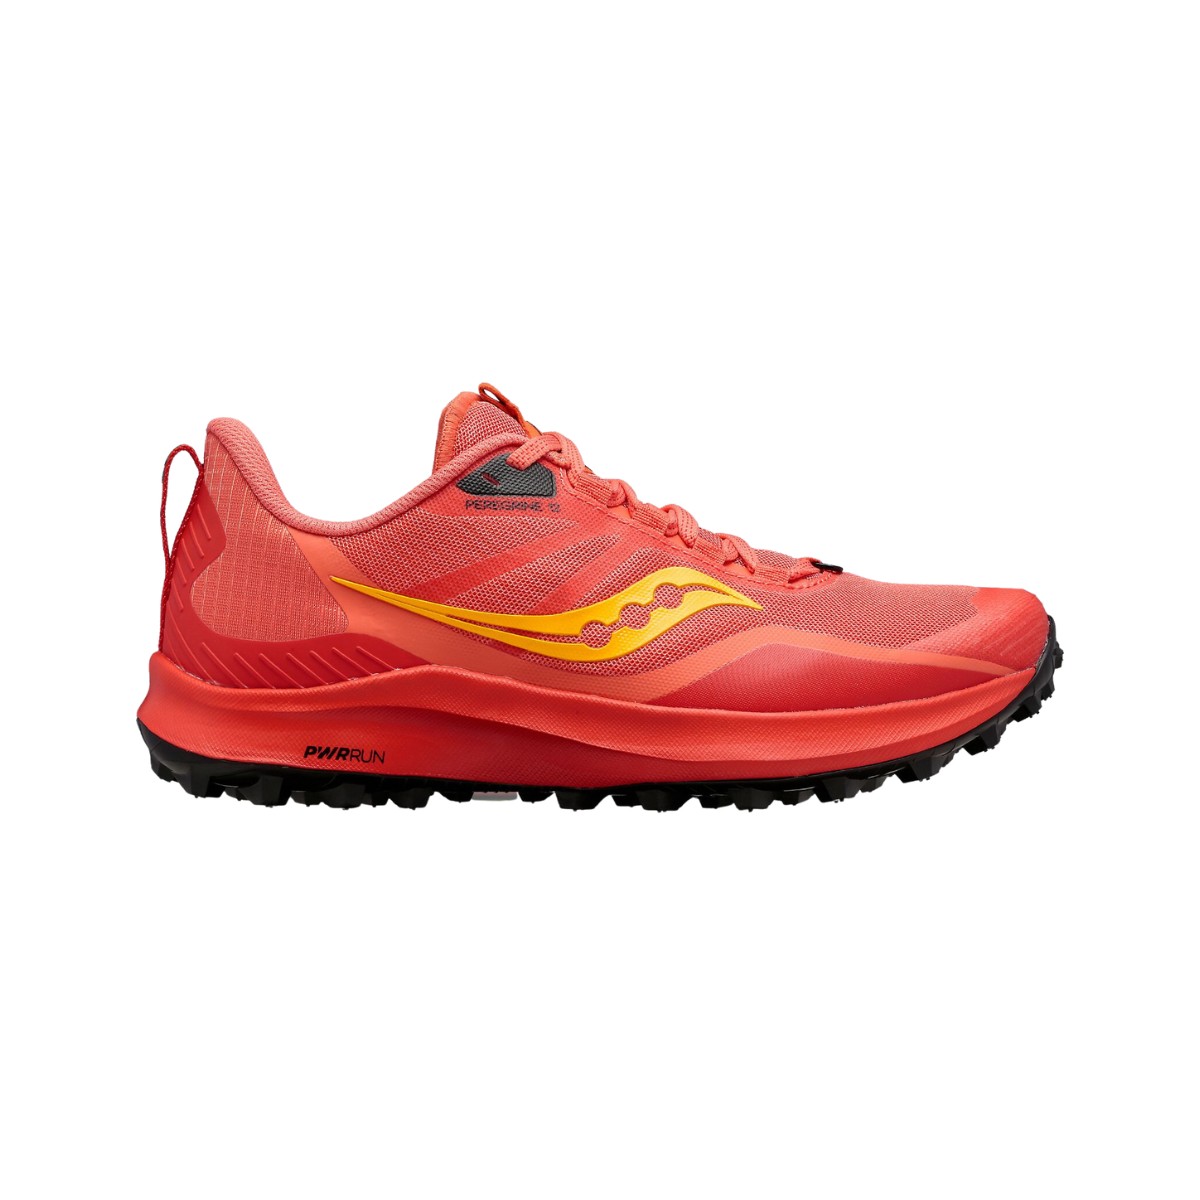 saucony chaussures peregrine 12 rouge femme, taille 37,5 - eur donna